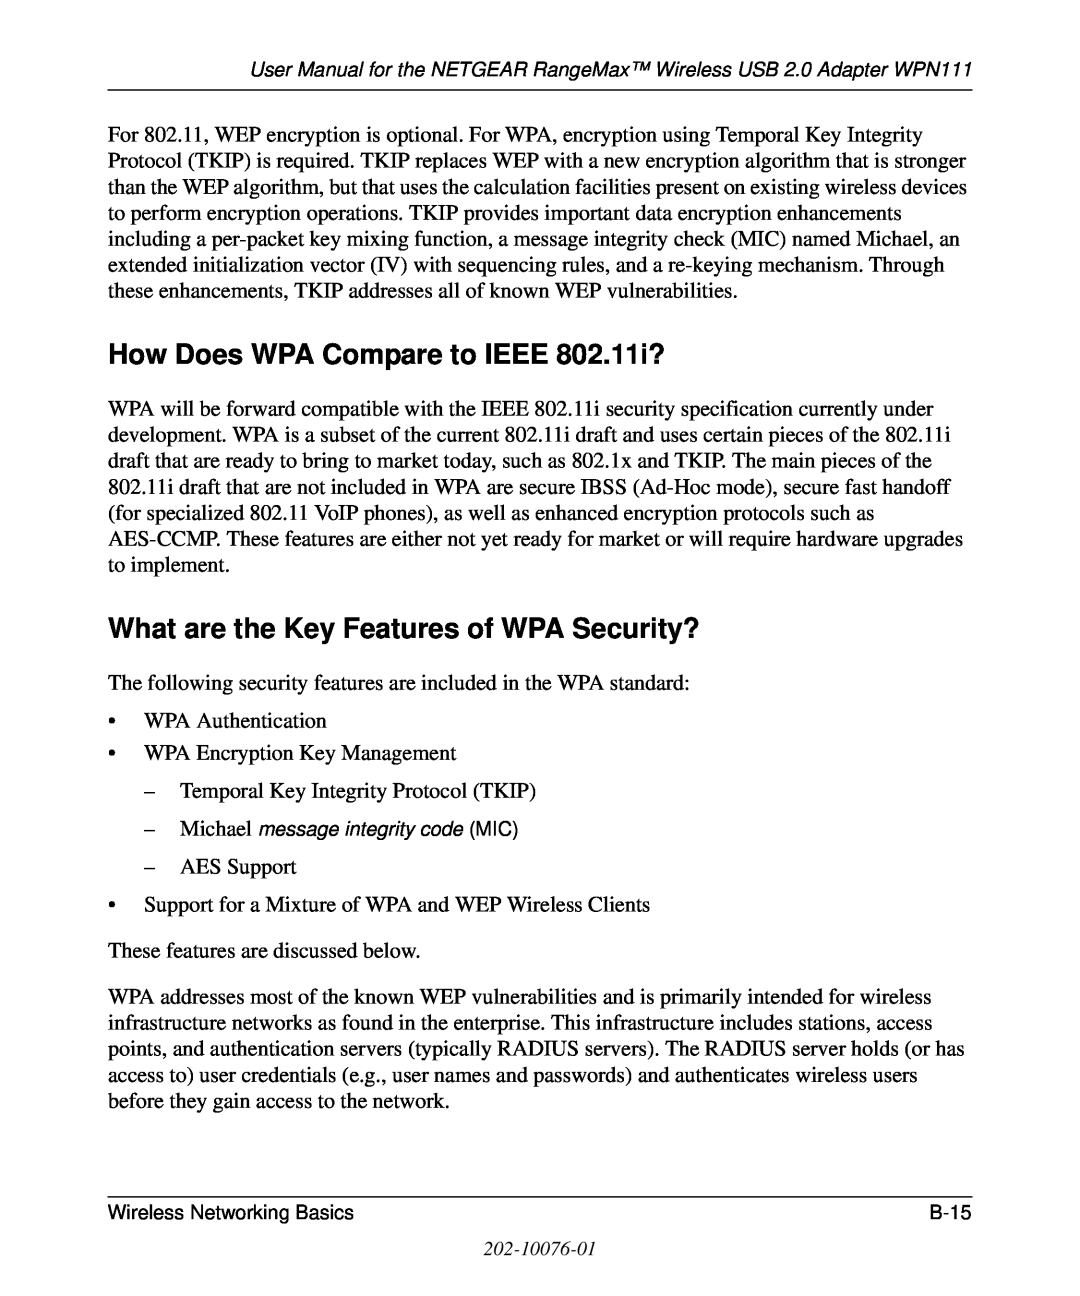 NETGEAR WPN111 user manual How Does WPA Compare to IEEE 802.11i?, What are the Key Features of WPA Security? 